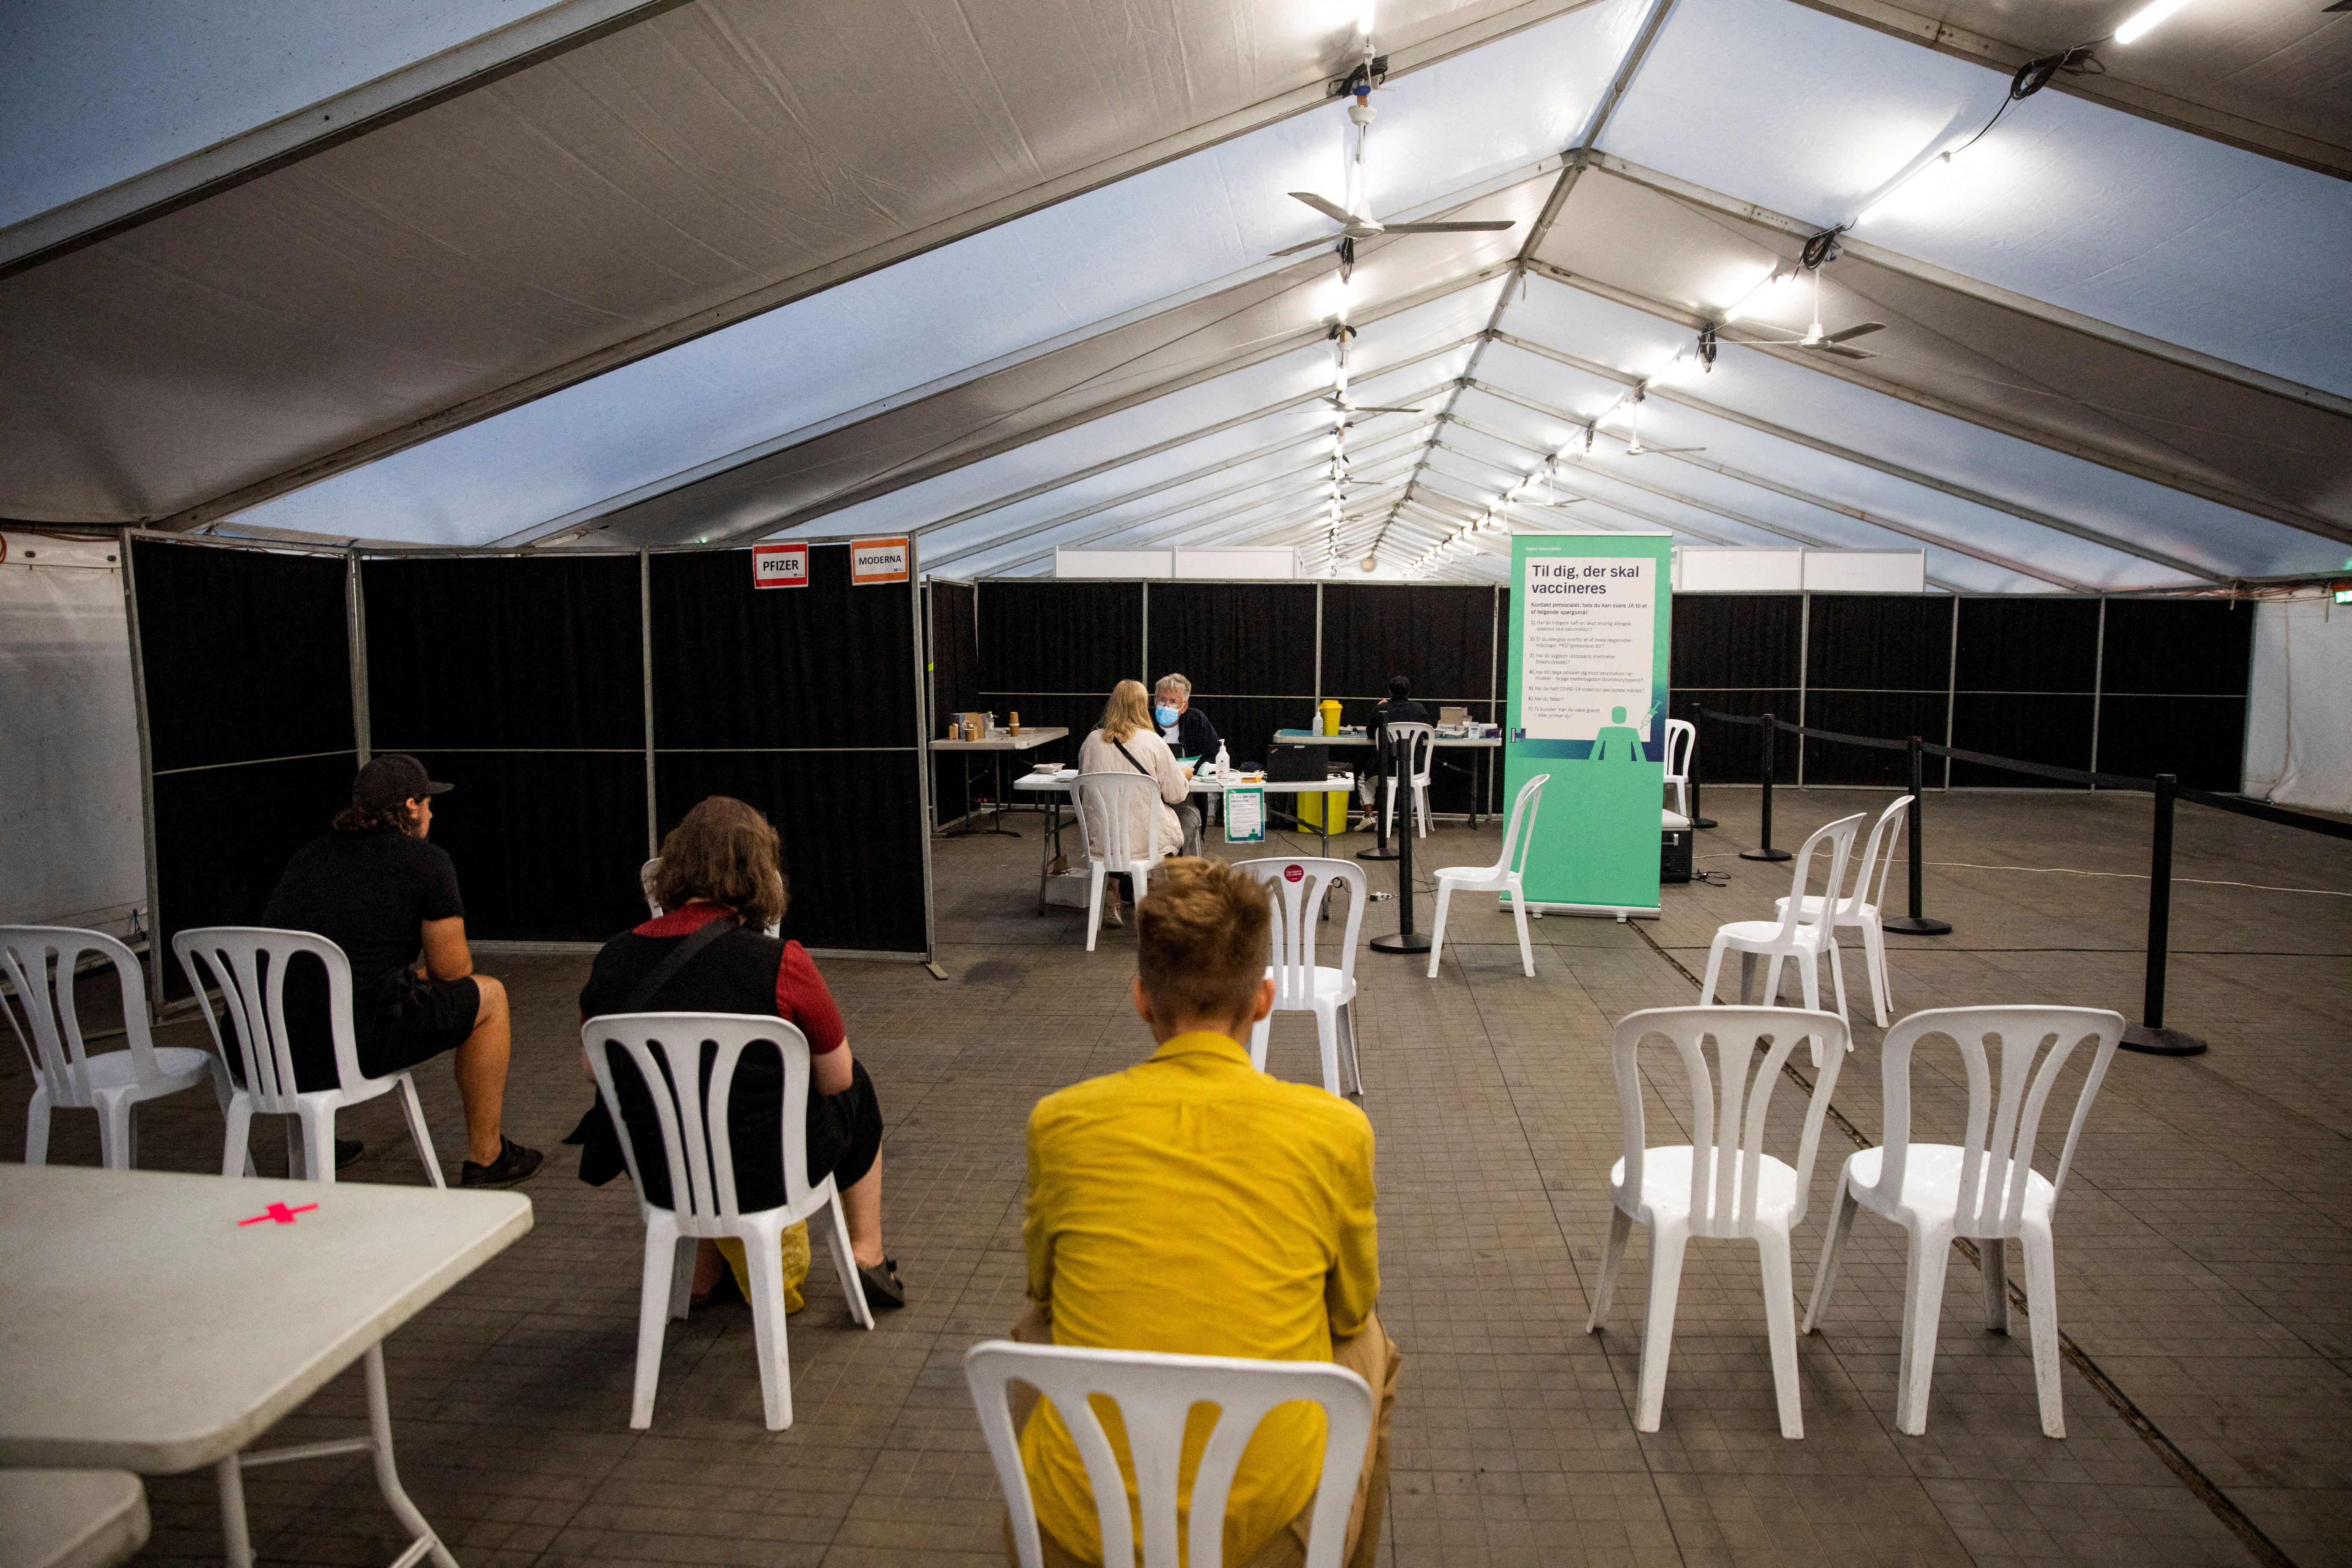 Pop-up vaccination center set-up in Faelledparken, for those attending the concert by a Danish band, 